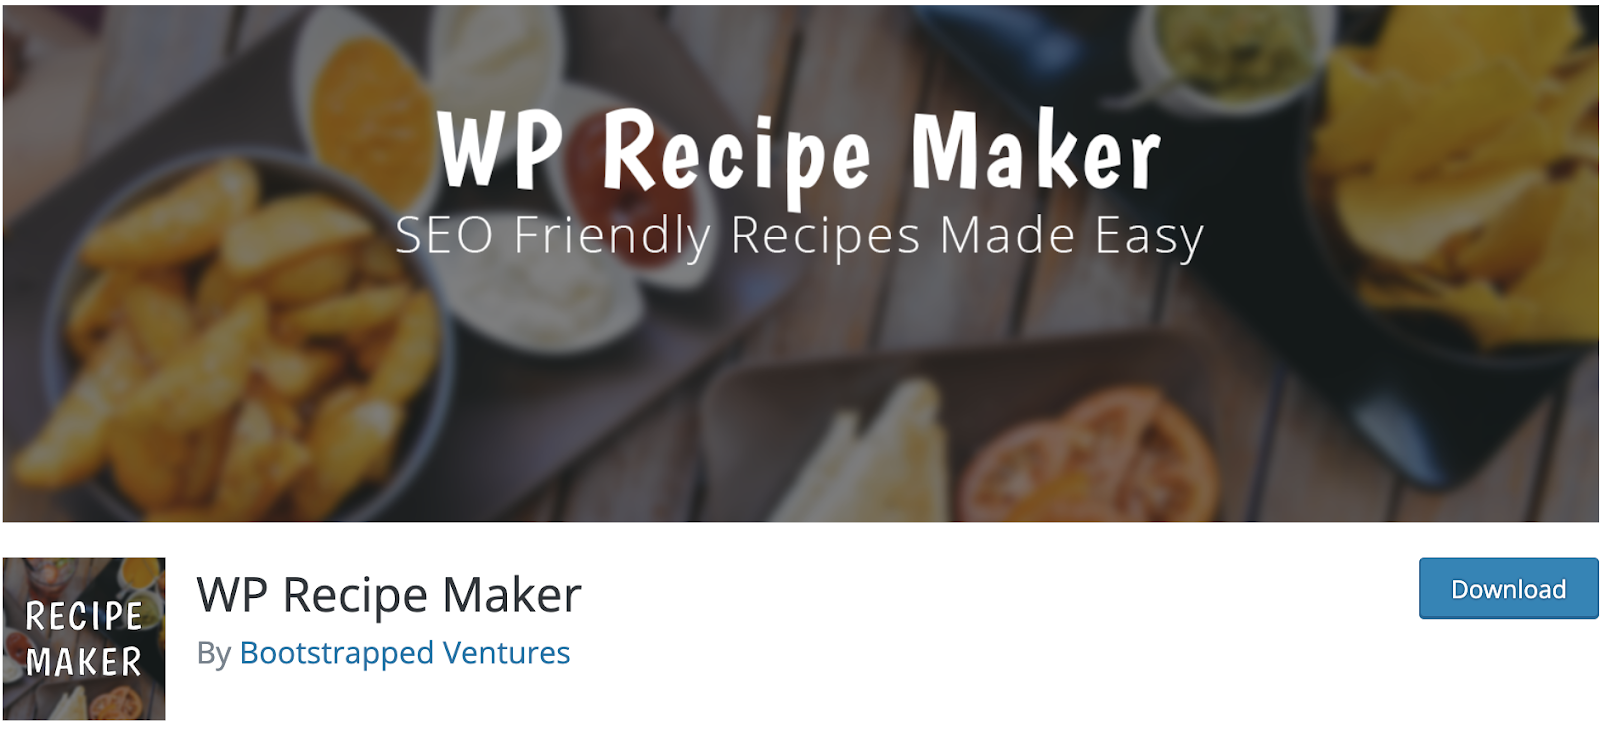 WP Recipe Maker download page